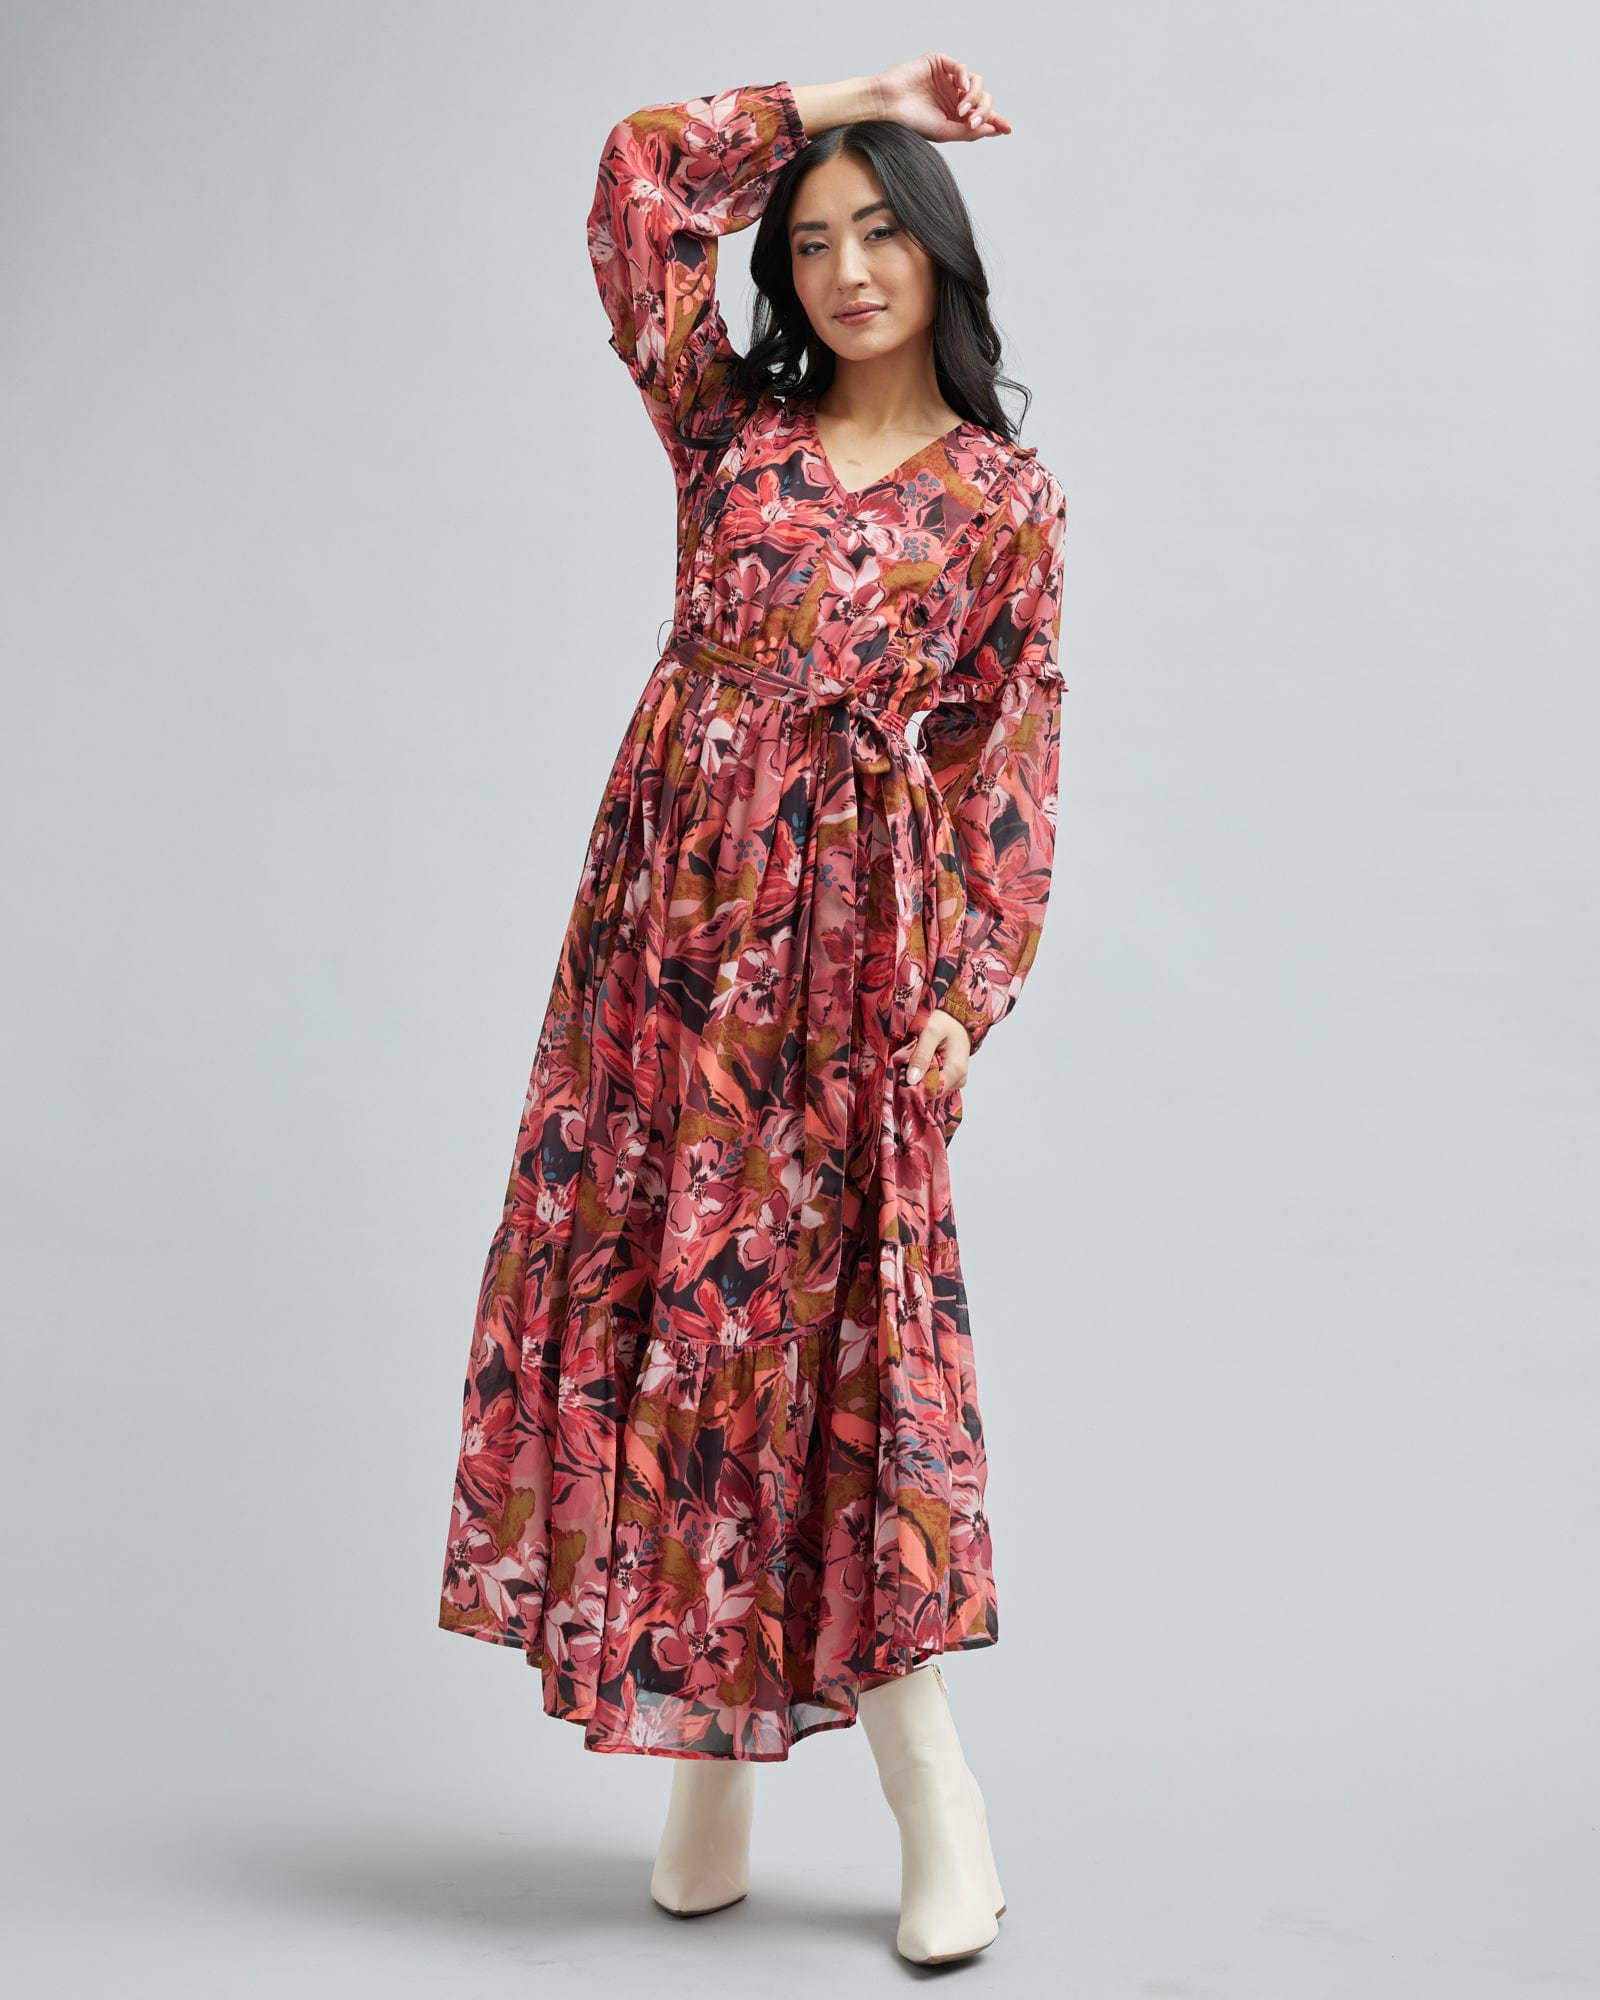 Woman in a long sleeve, floral print, maxi dress